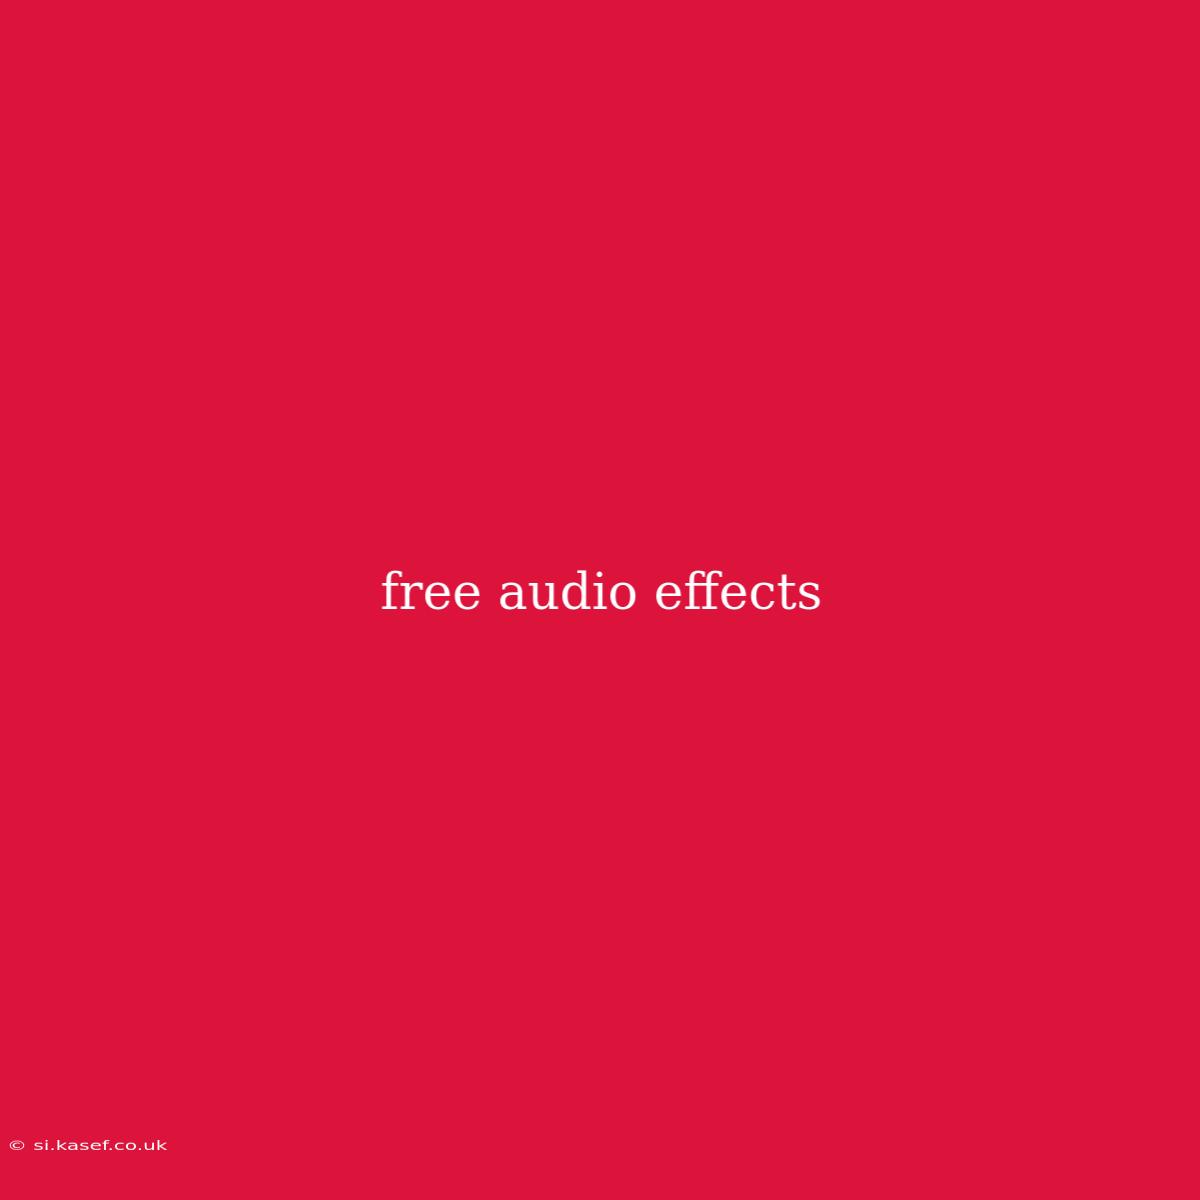 Free Audio Effects